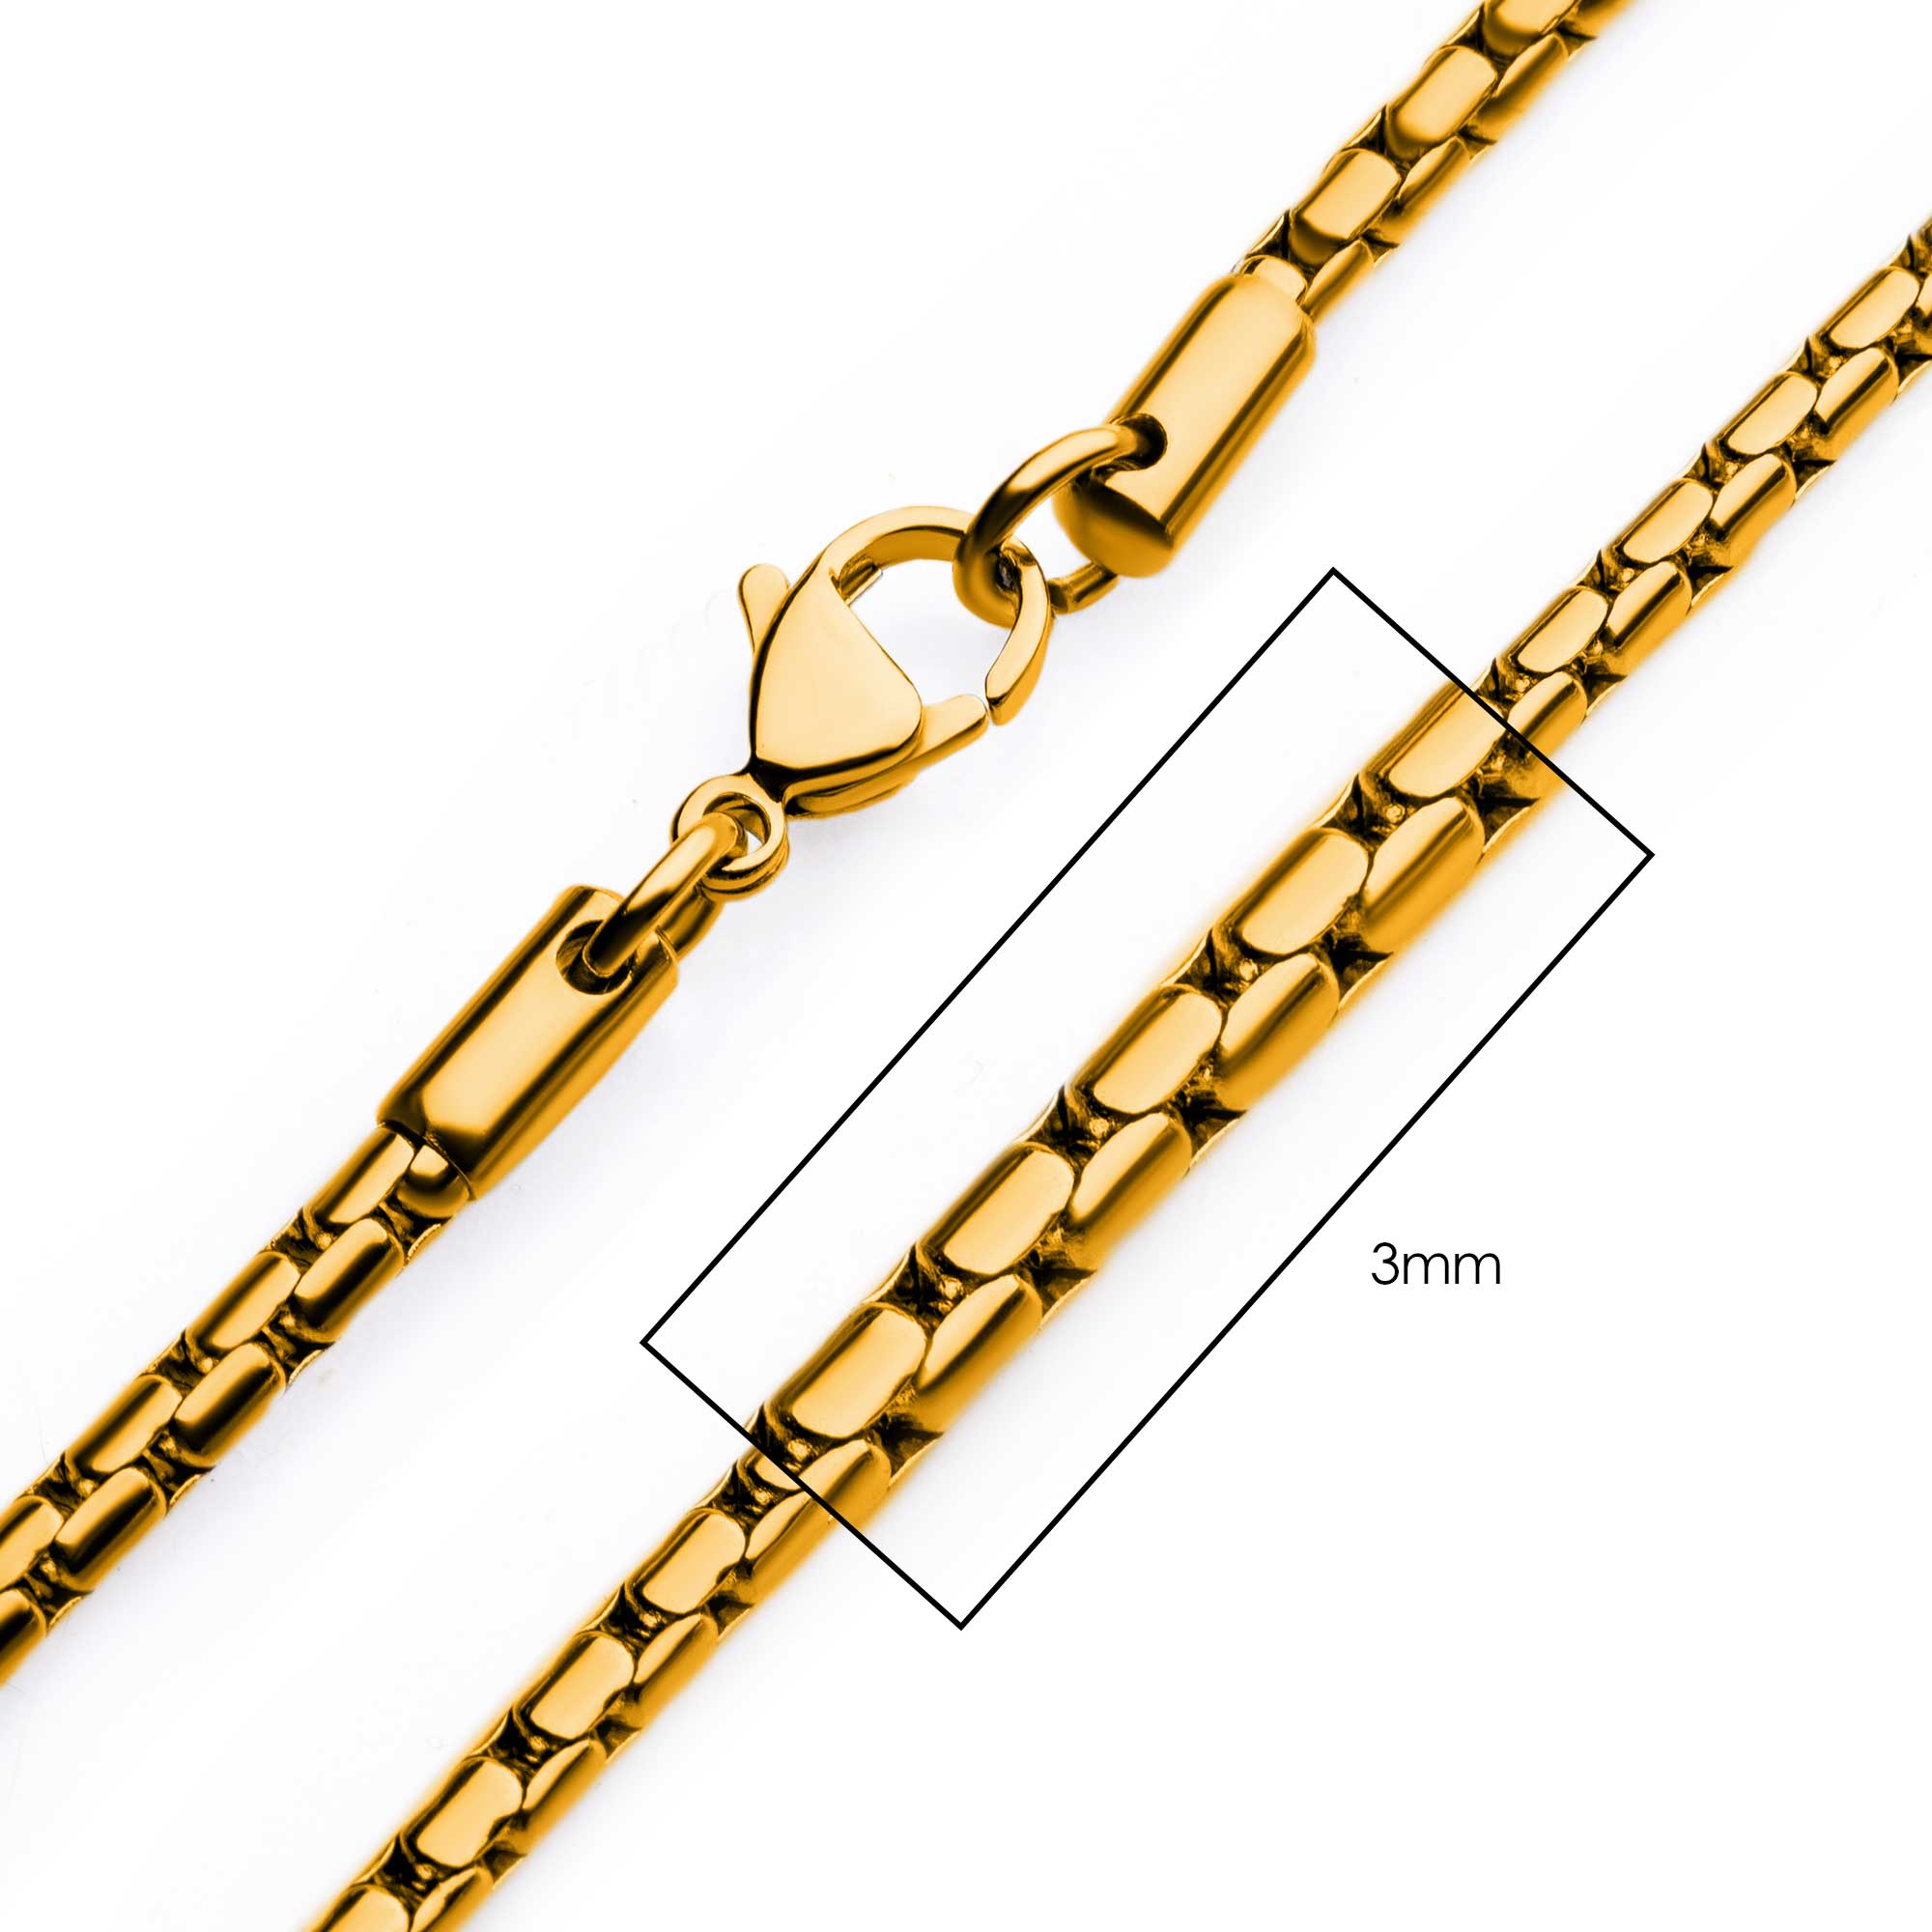 3mm 18K Gold Plated Boston Link Chain Spath Jewelers Bartow, FL